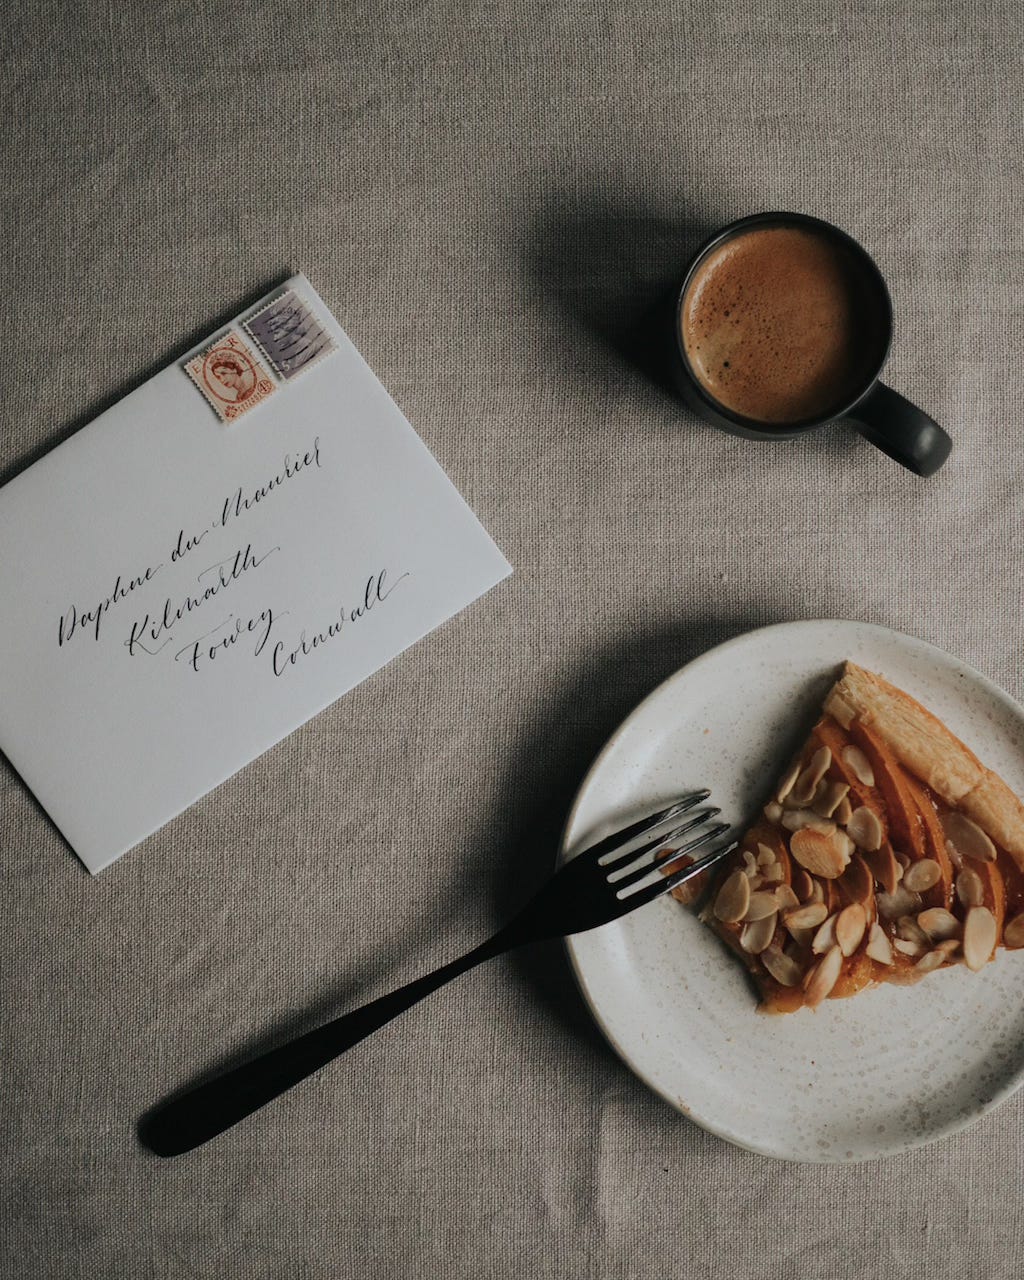 Envelope addressed to Daphné du Maurier, coffee cup and fruit tart on a table